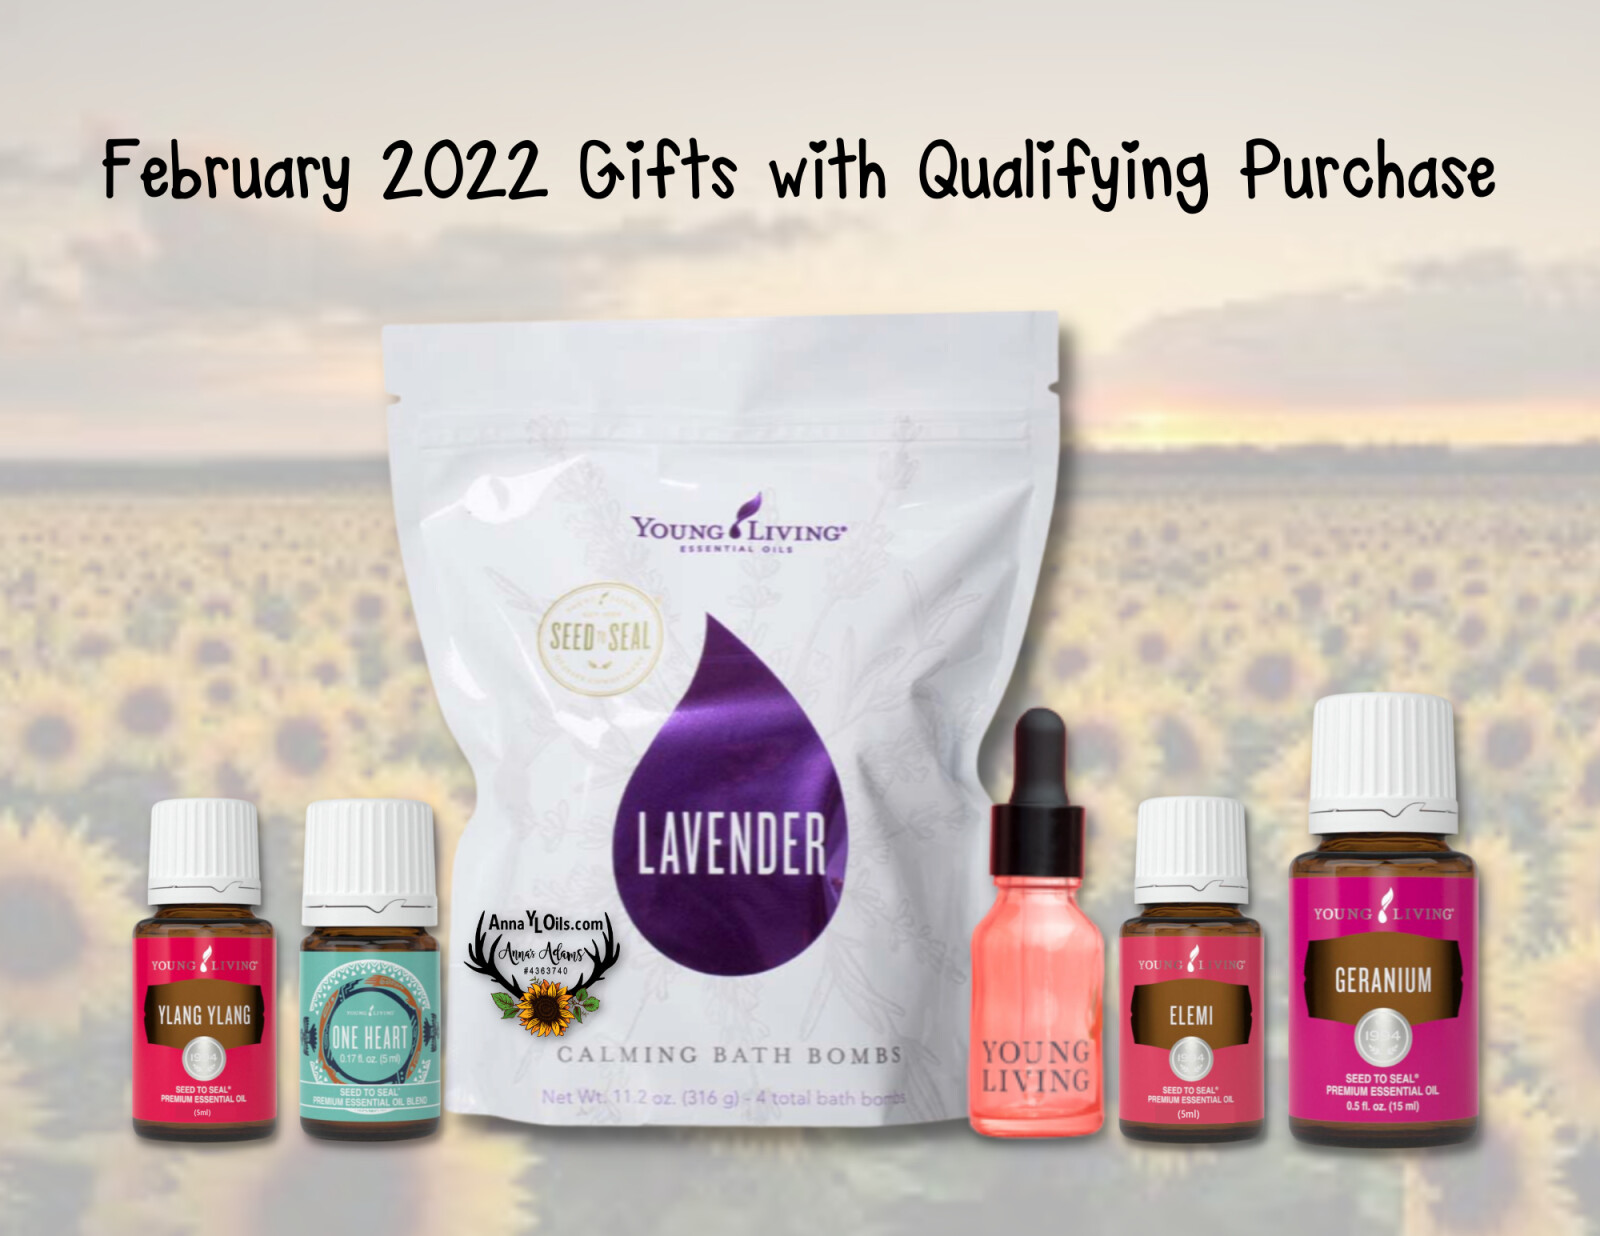 February 2022 Free Gifts with Qualifying Purchase!